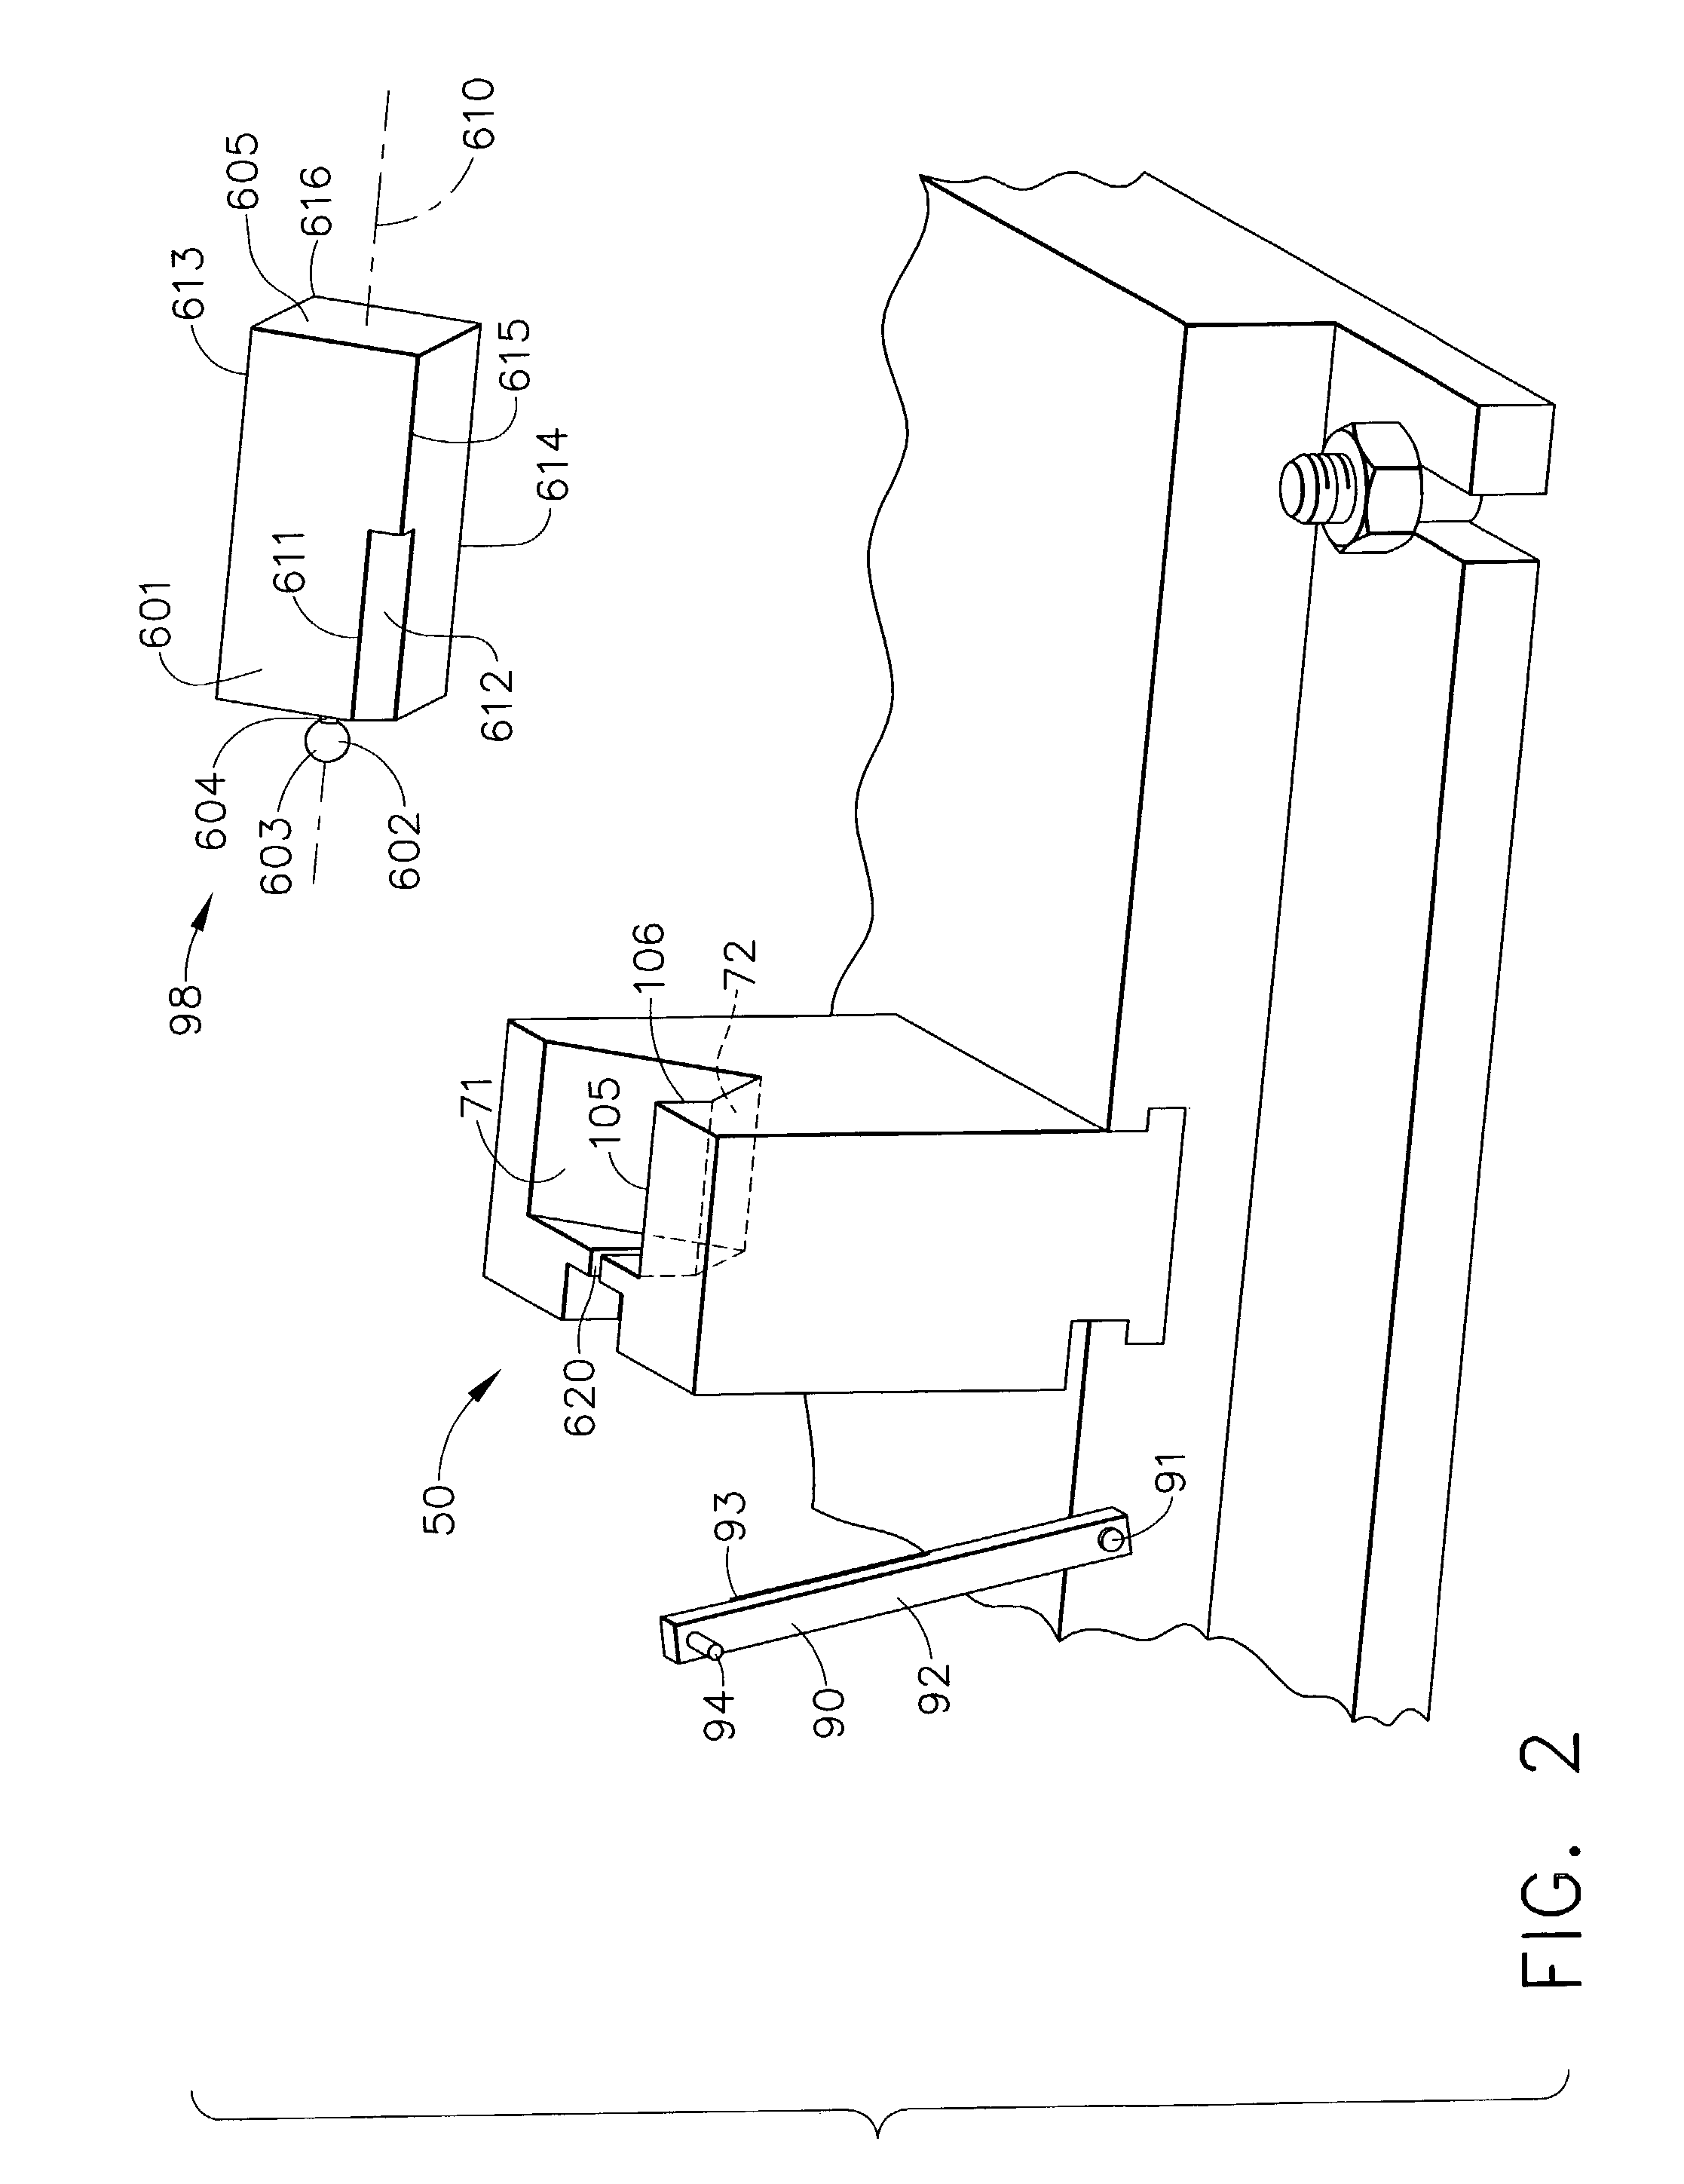 Manufacturing cell using tooling apparatus